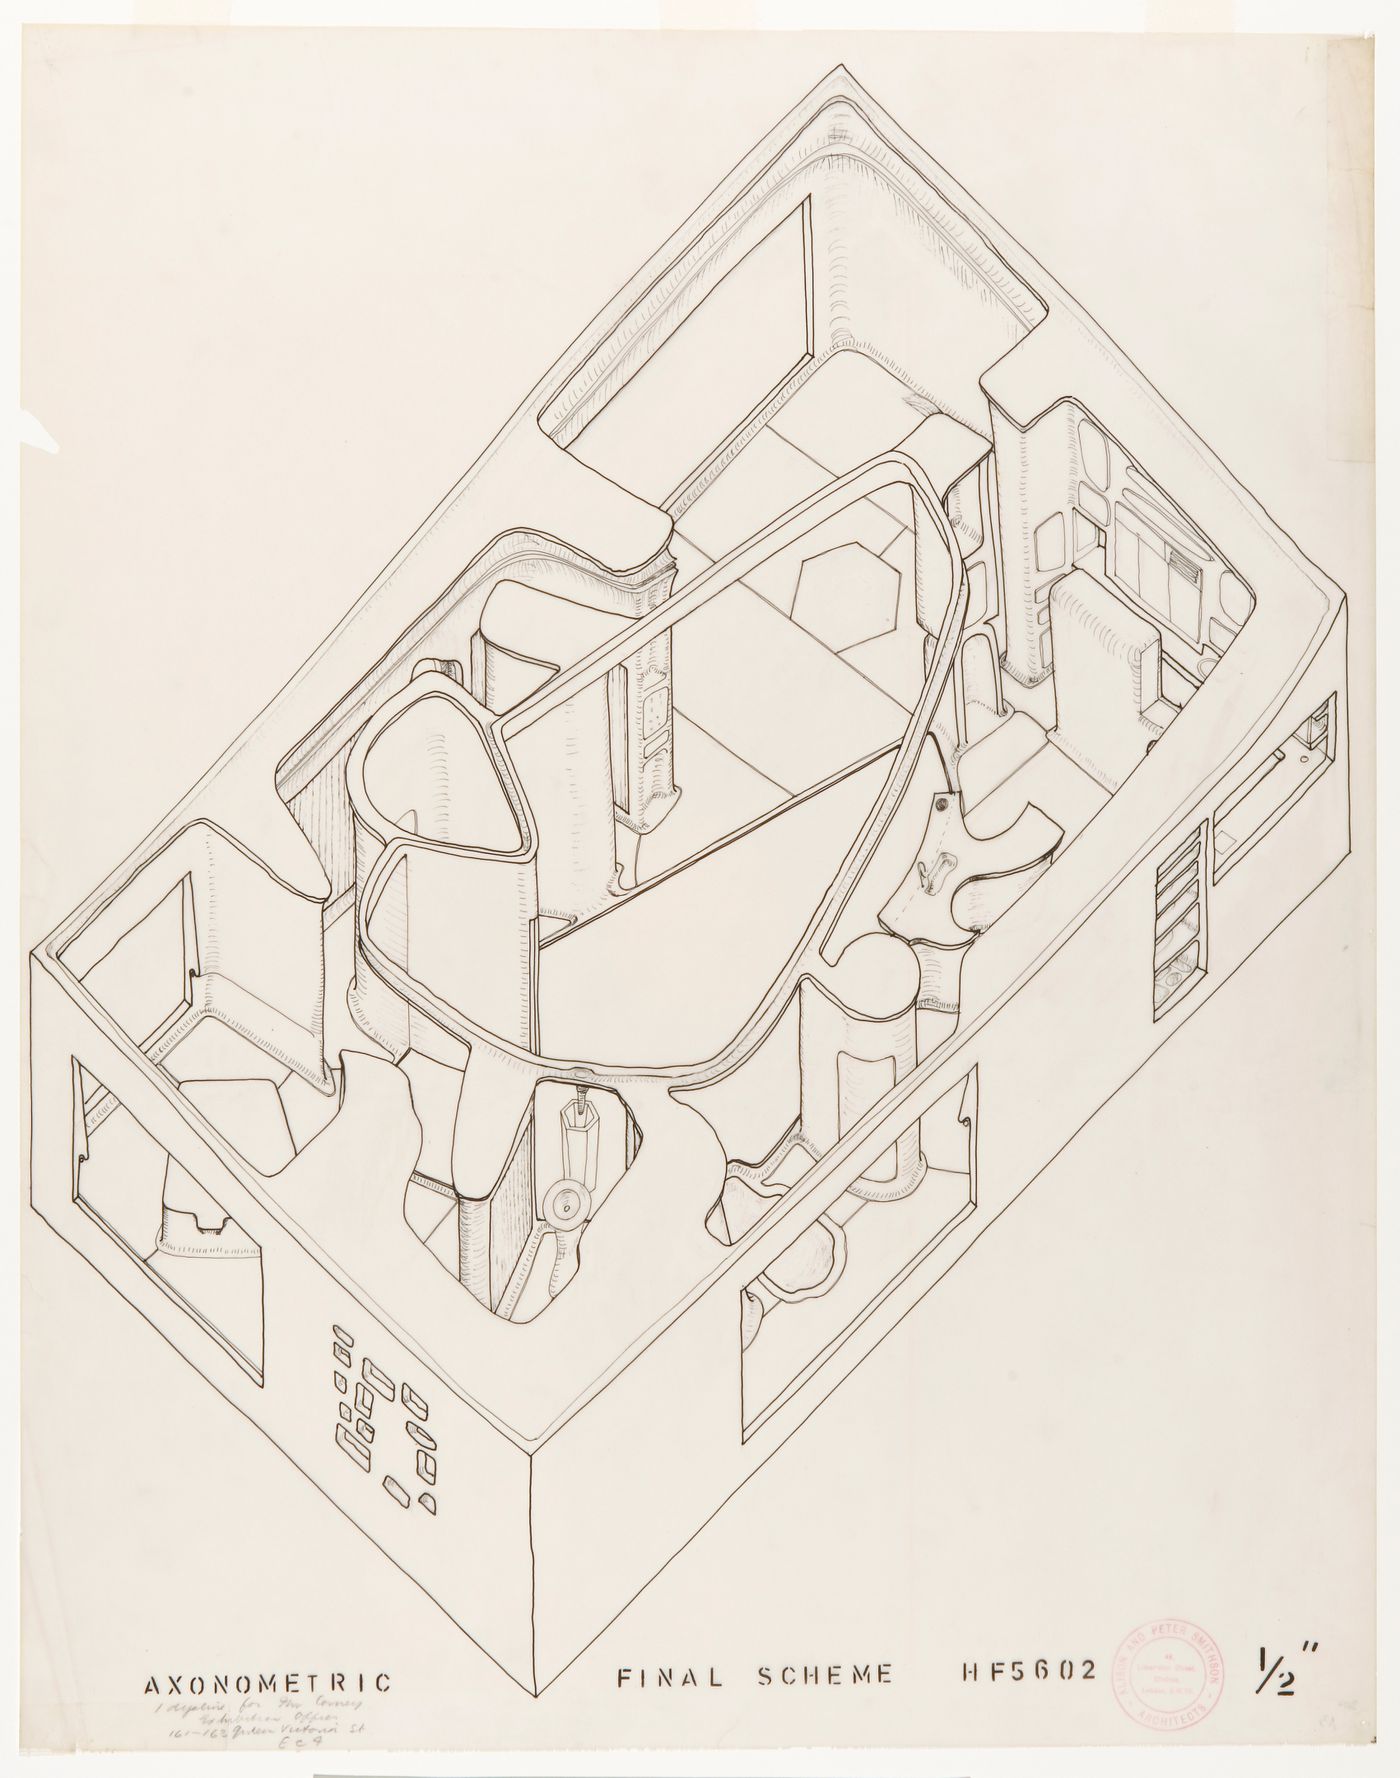 House of the Future, Daily Mail Ideal Homes Exhibition, London, England: axonometric of the final scheme